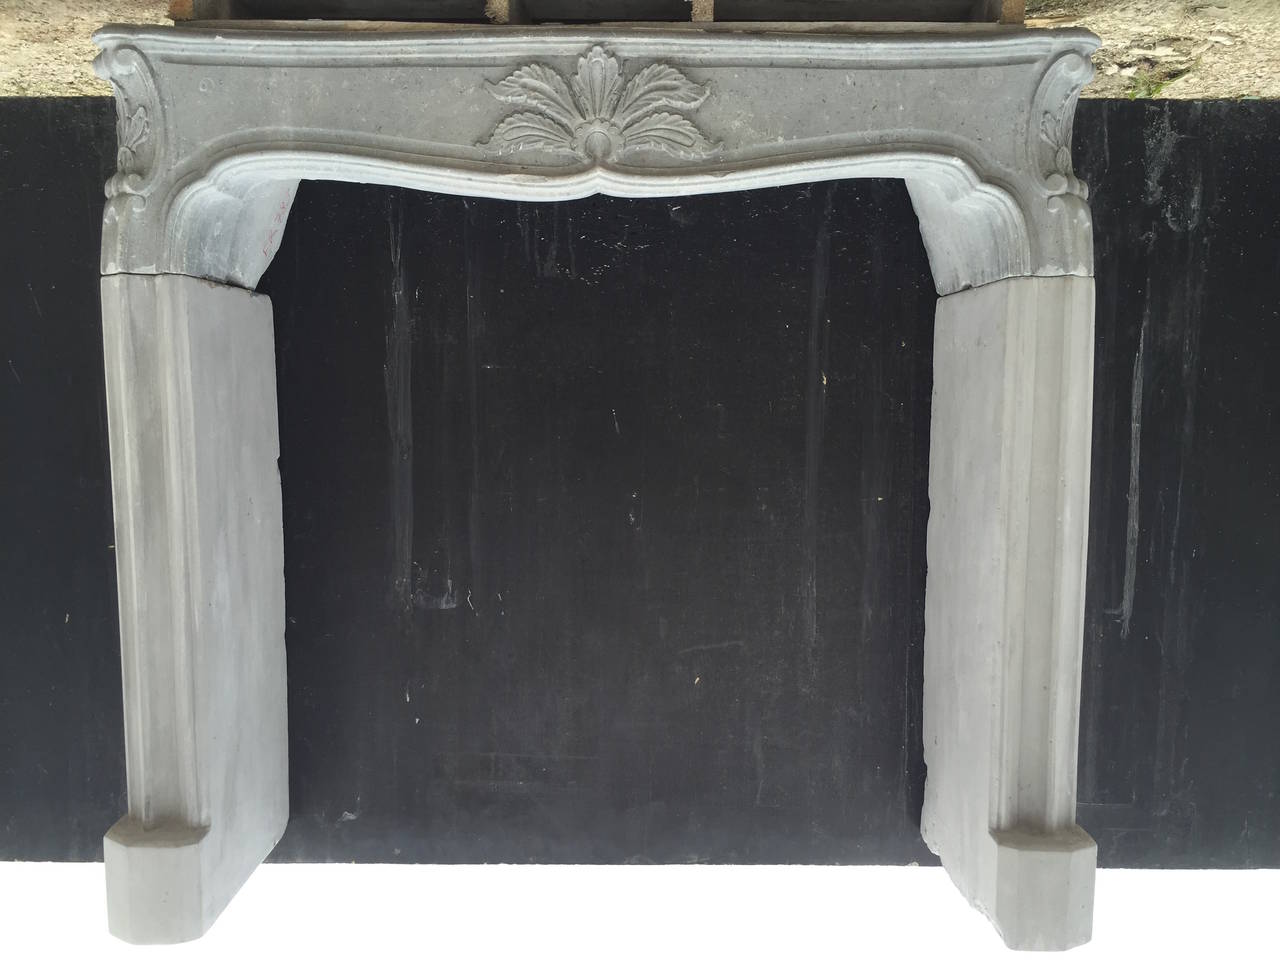 A French Louis XV style fireplace hand carved in stone from France. Restored perfectly.
Beautiful quality of French Art Work from that period.
Great flower and design hand carved on the middle and sides of the mantel.
Legs have been restored